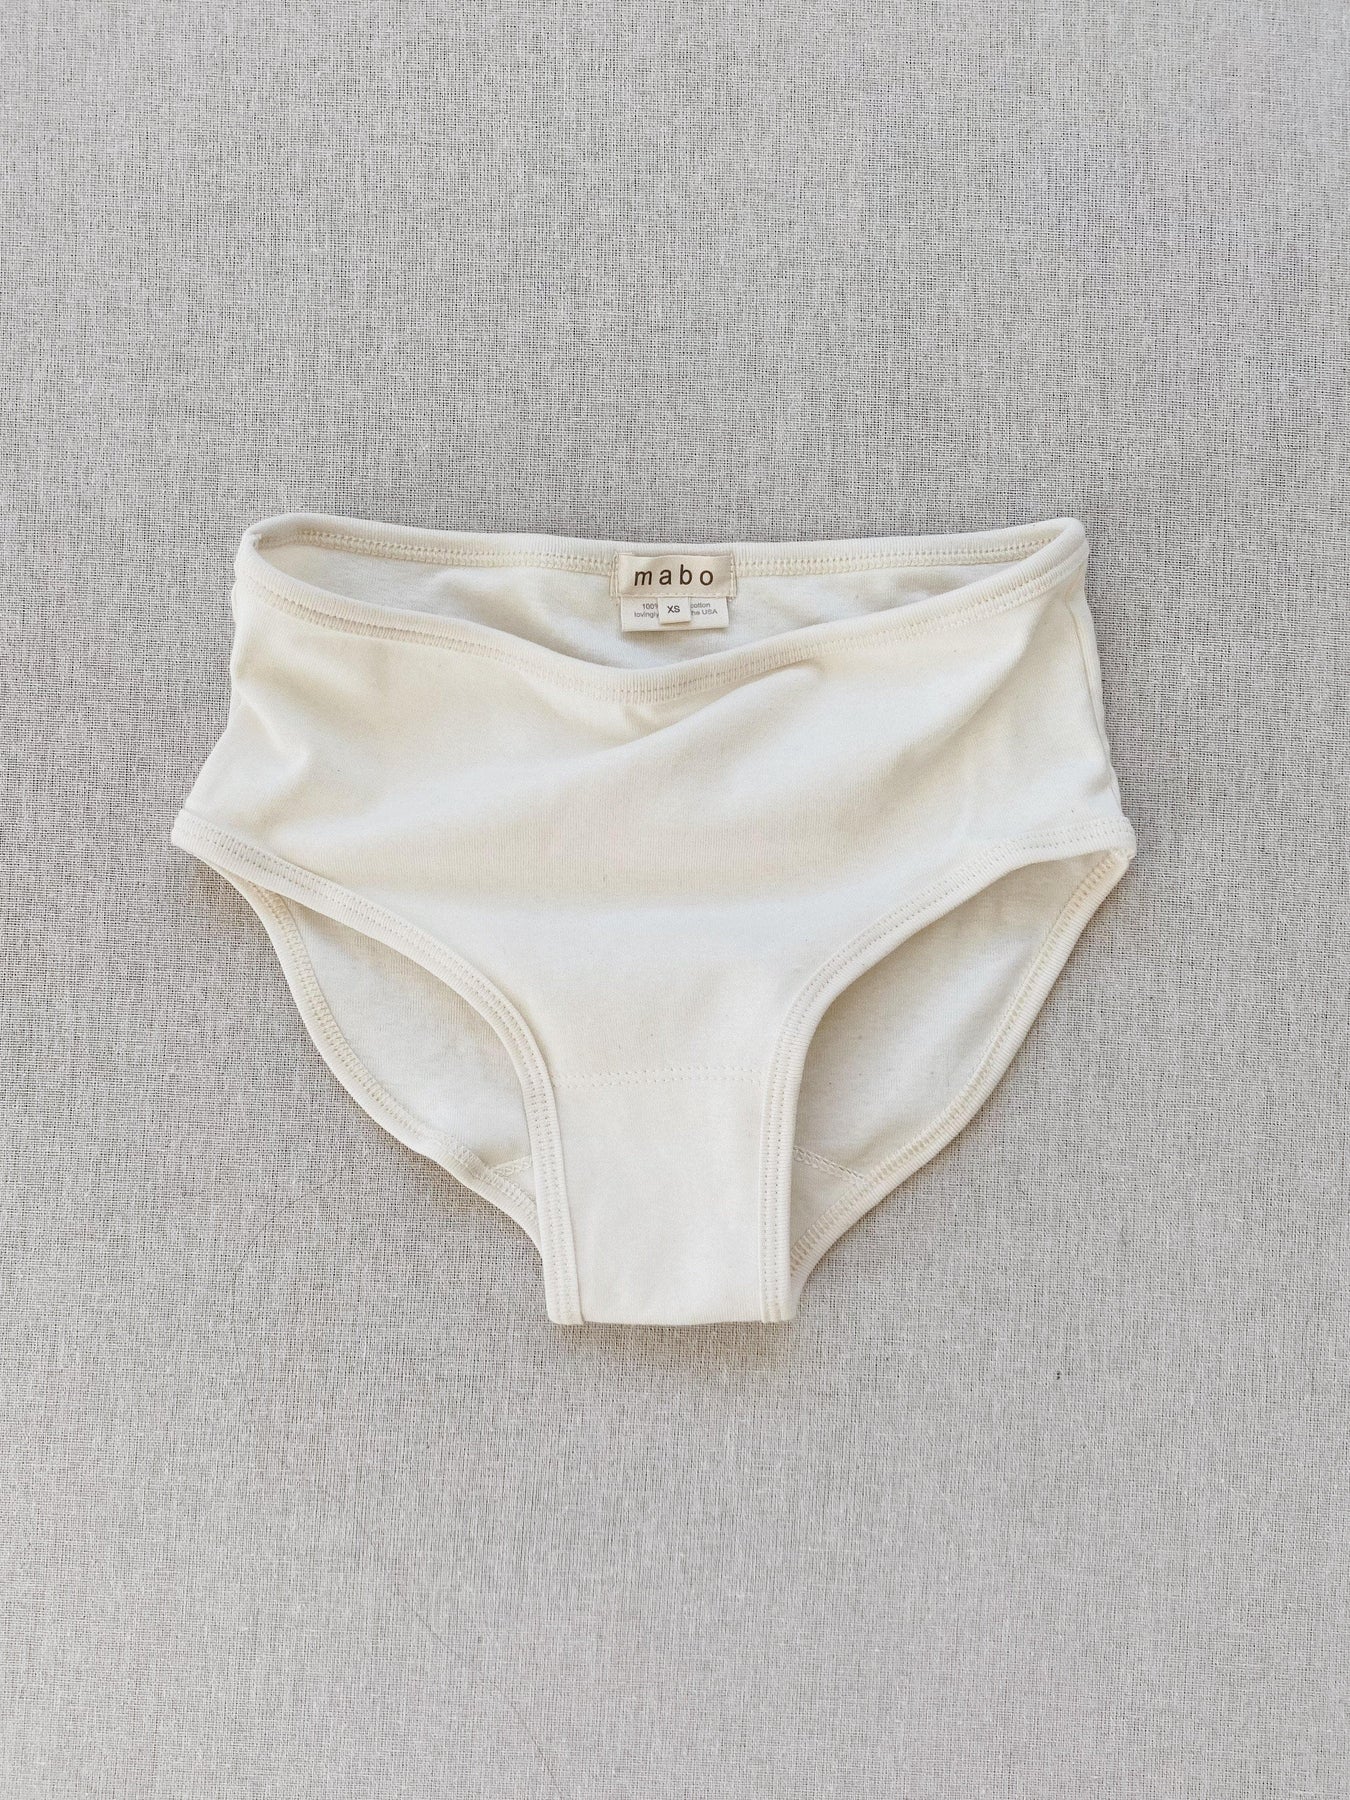 adult organic cotton undies in natural – mabo